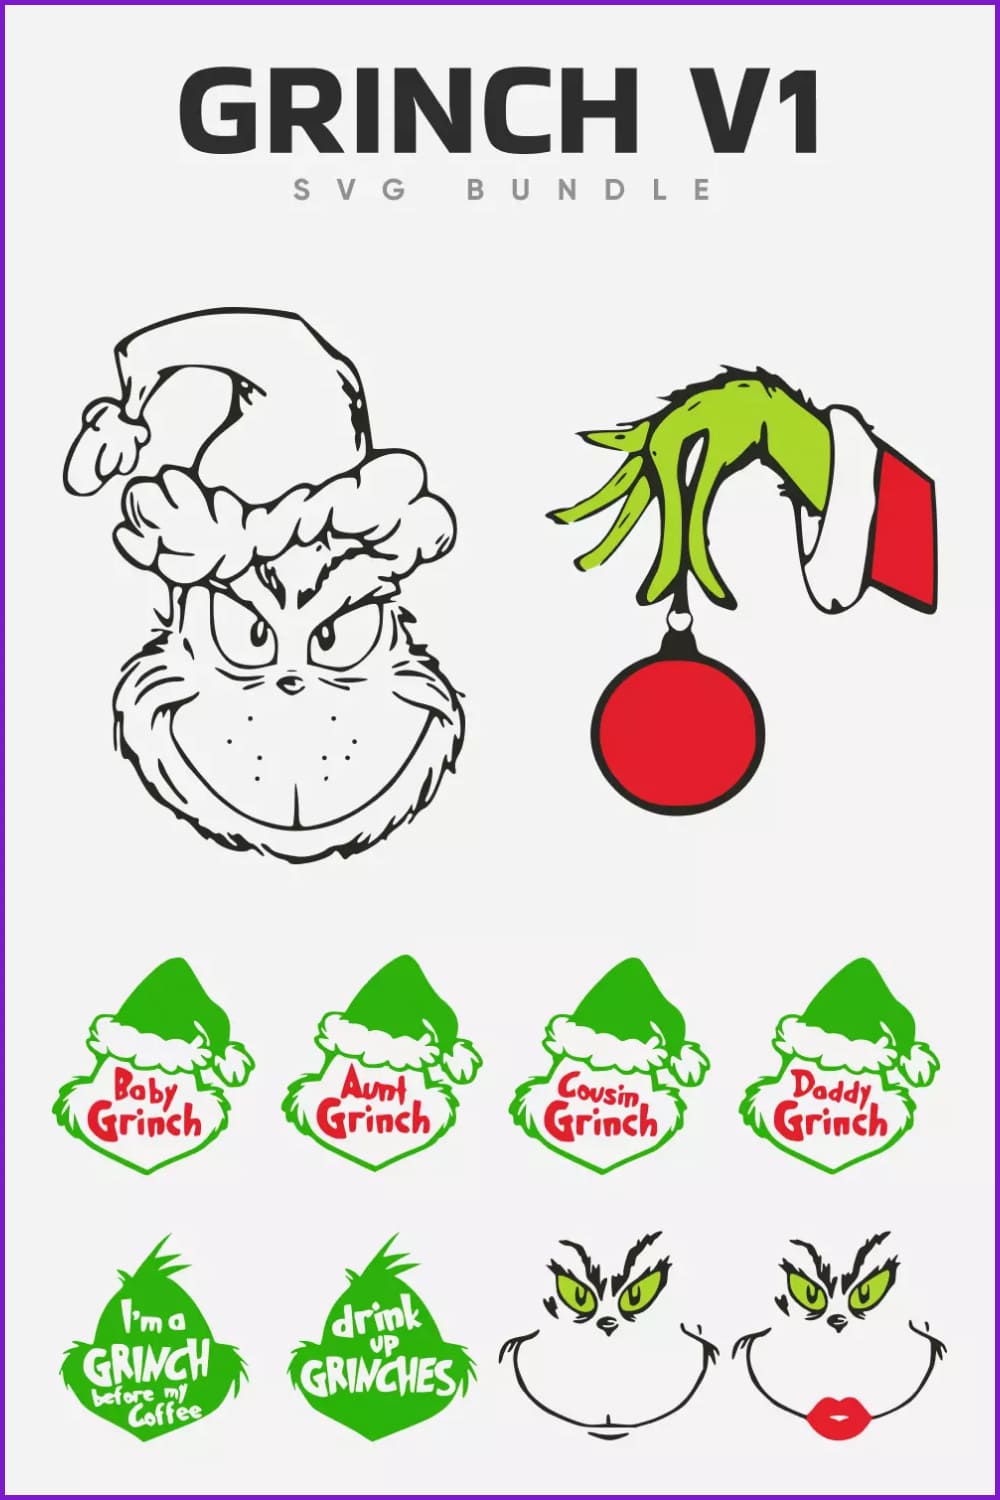 Grinch sillhouettes with signs.